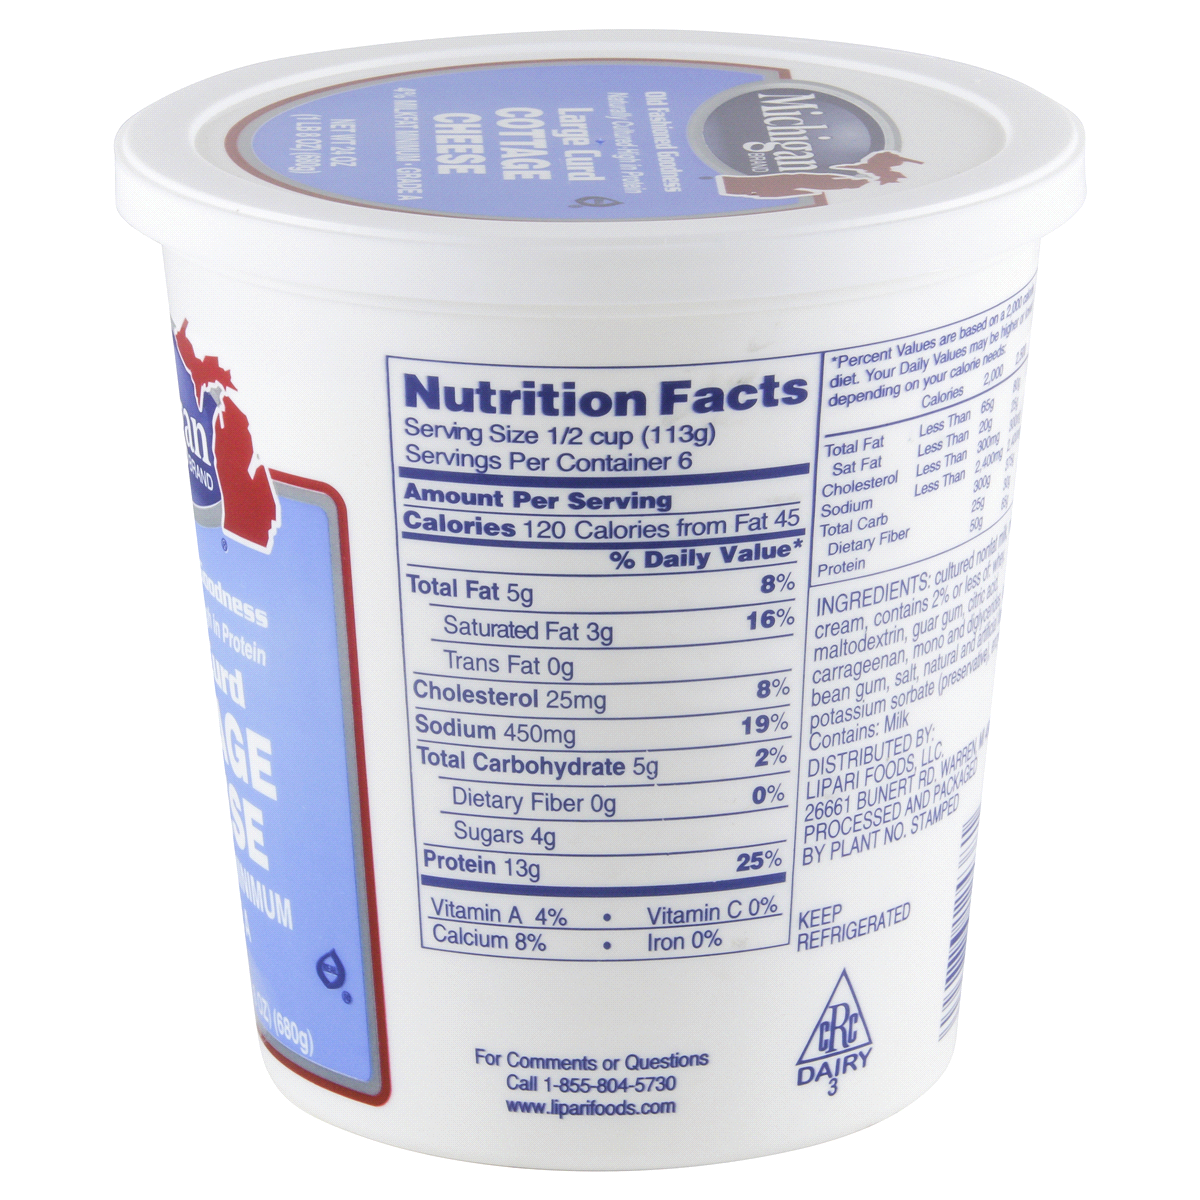 slide 4 of 5, Michigan Brand 4% Milkfat Large Curd Cottage Cheese, 24 oz